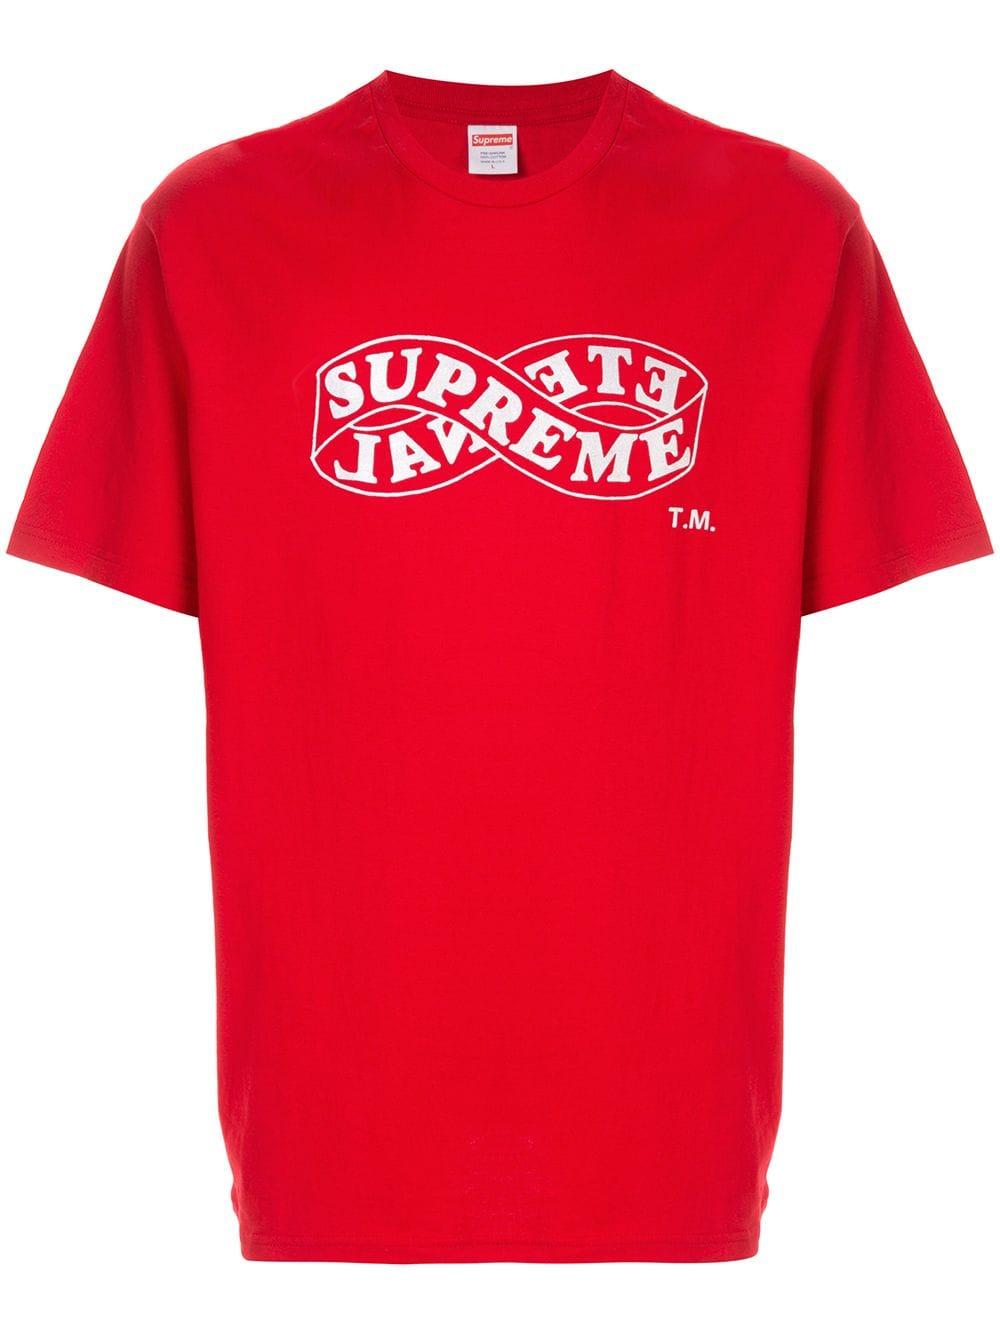 Supreme Cotton Eternal T-shirt in Red for Men - Lyst